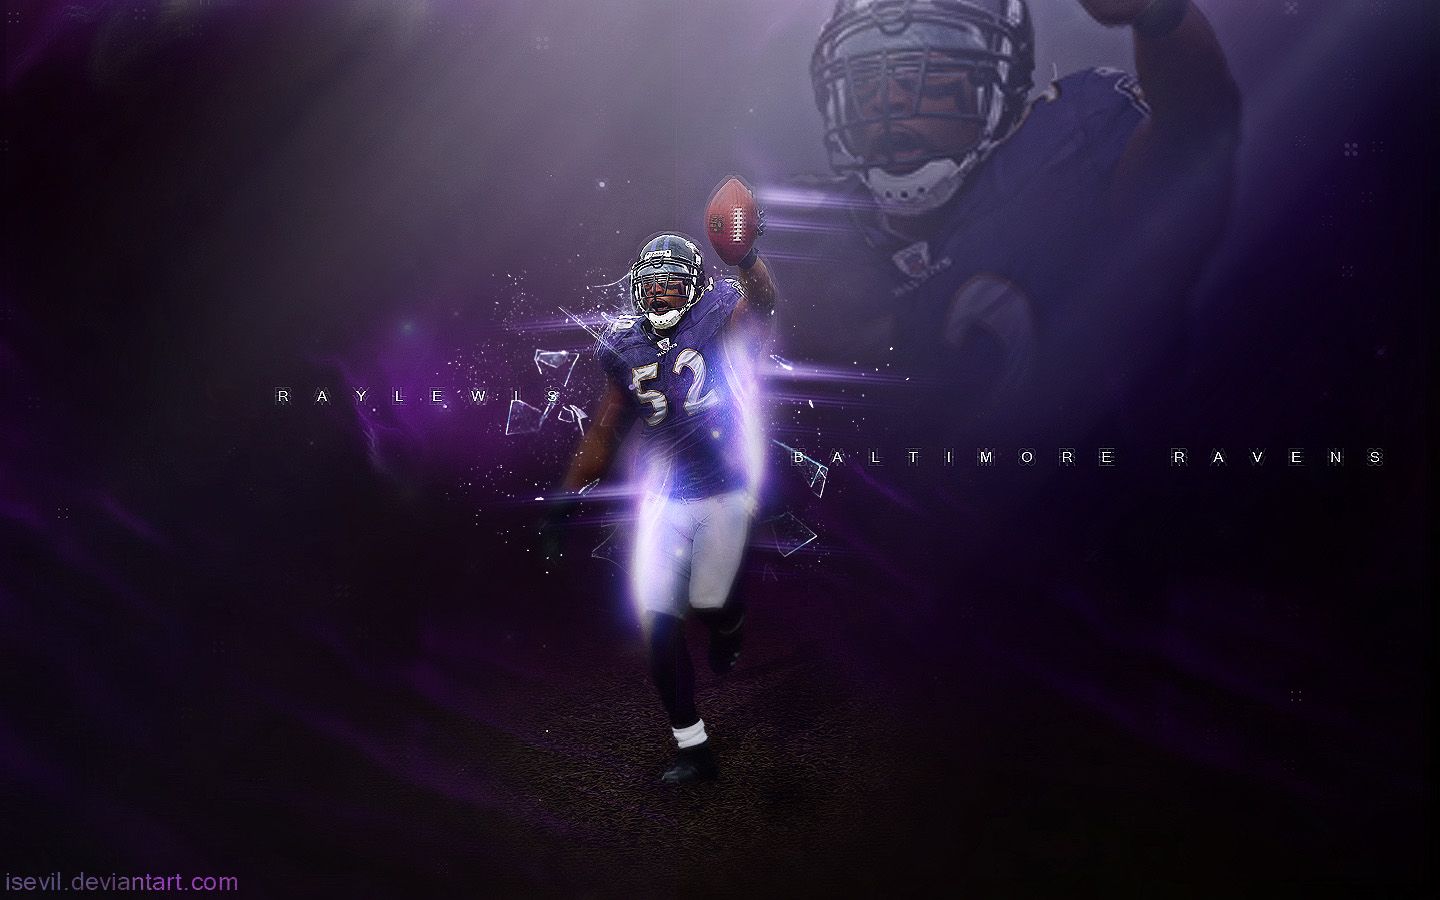 ray lewis | Page 2